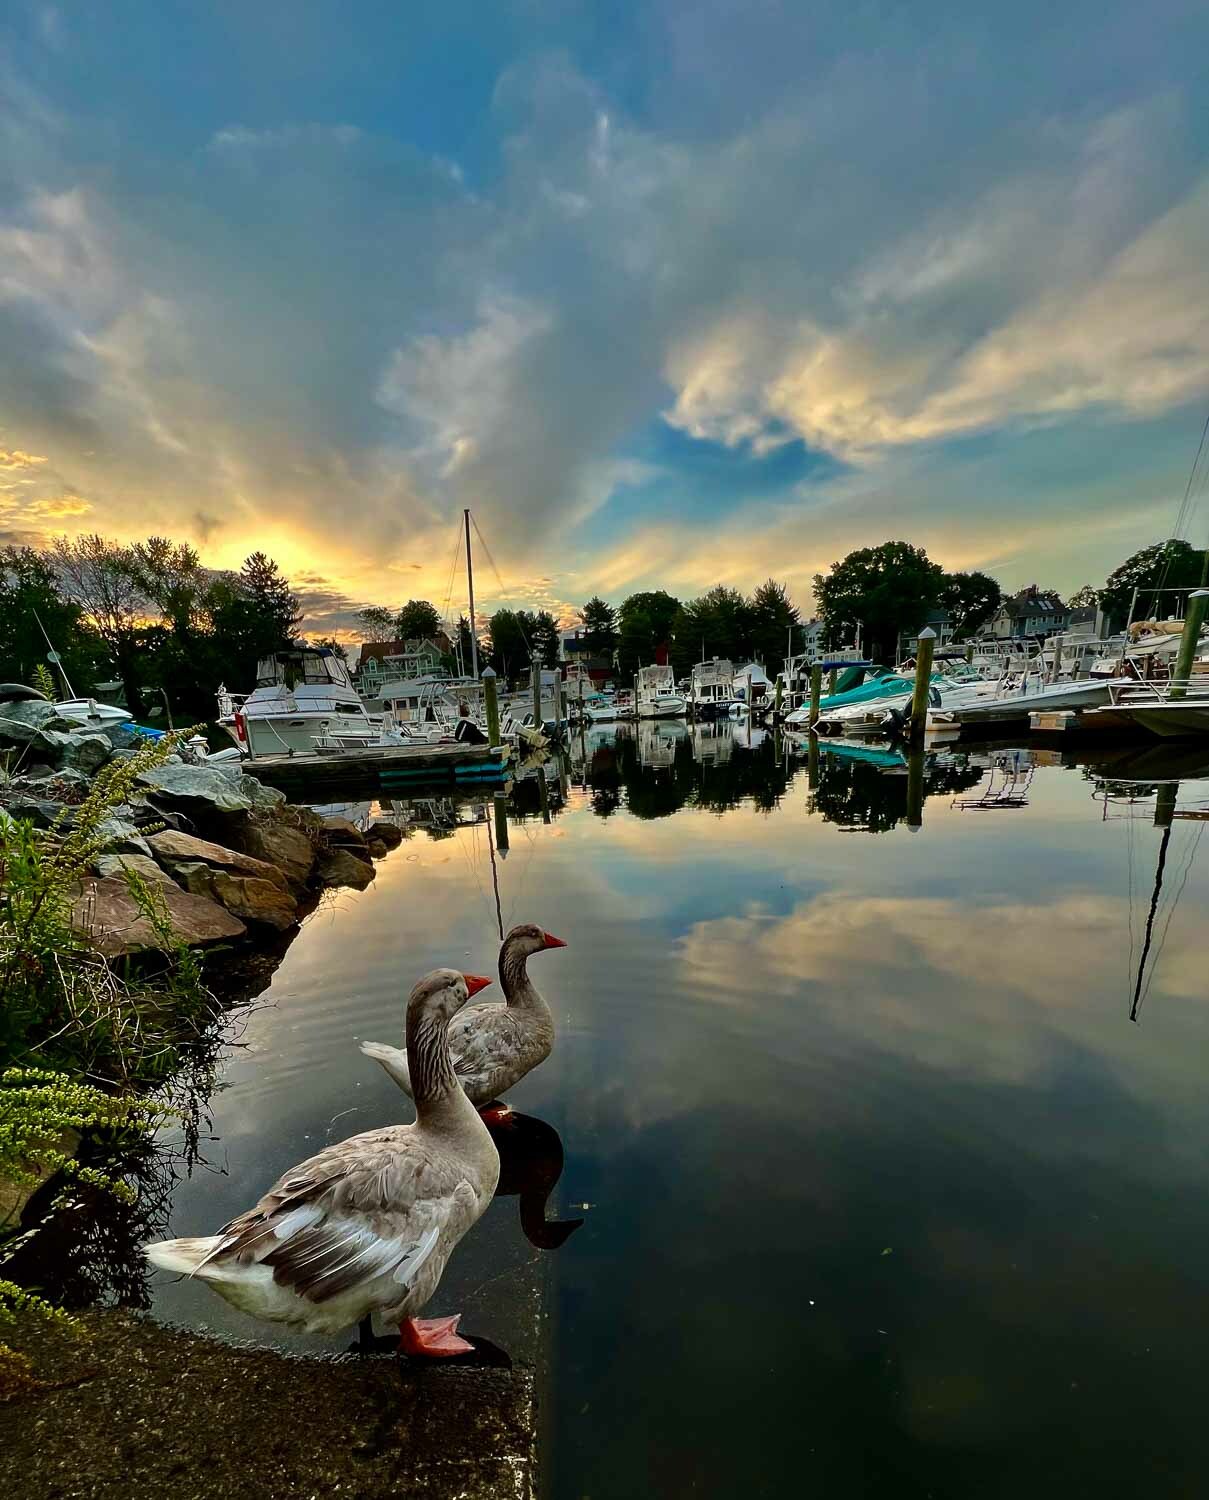 Ducks in the Pawtuxet Cover Marina